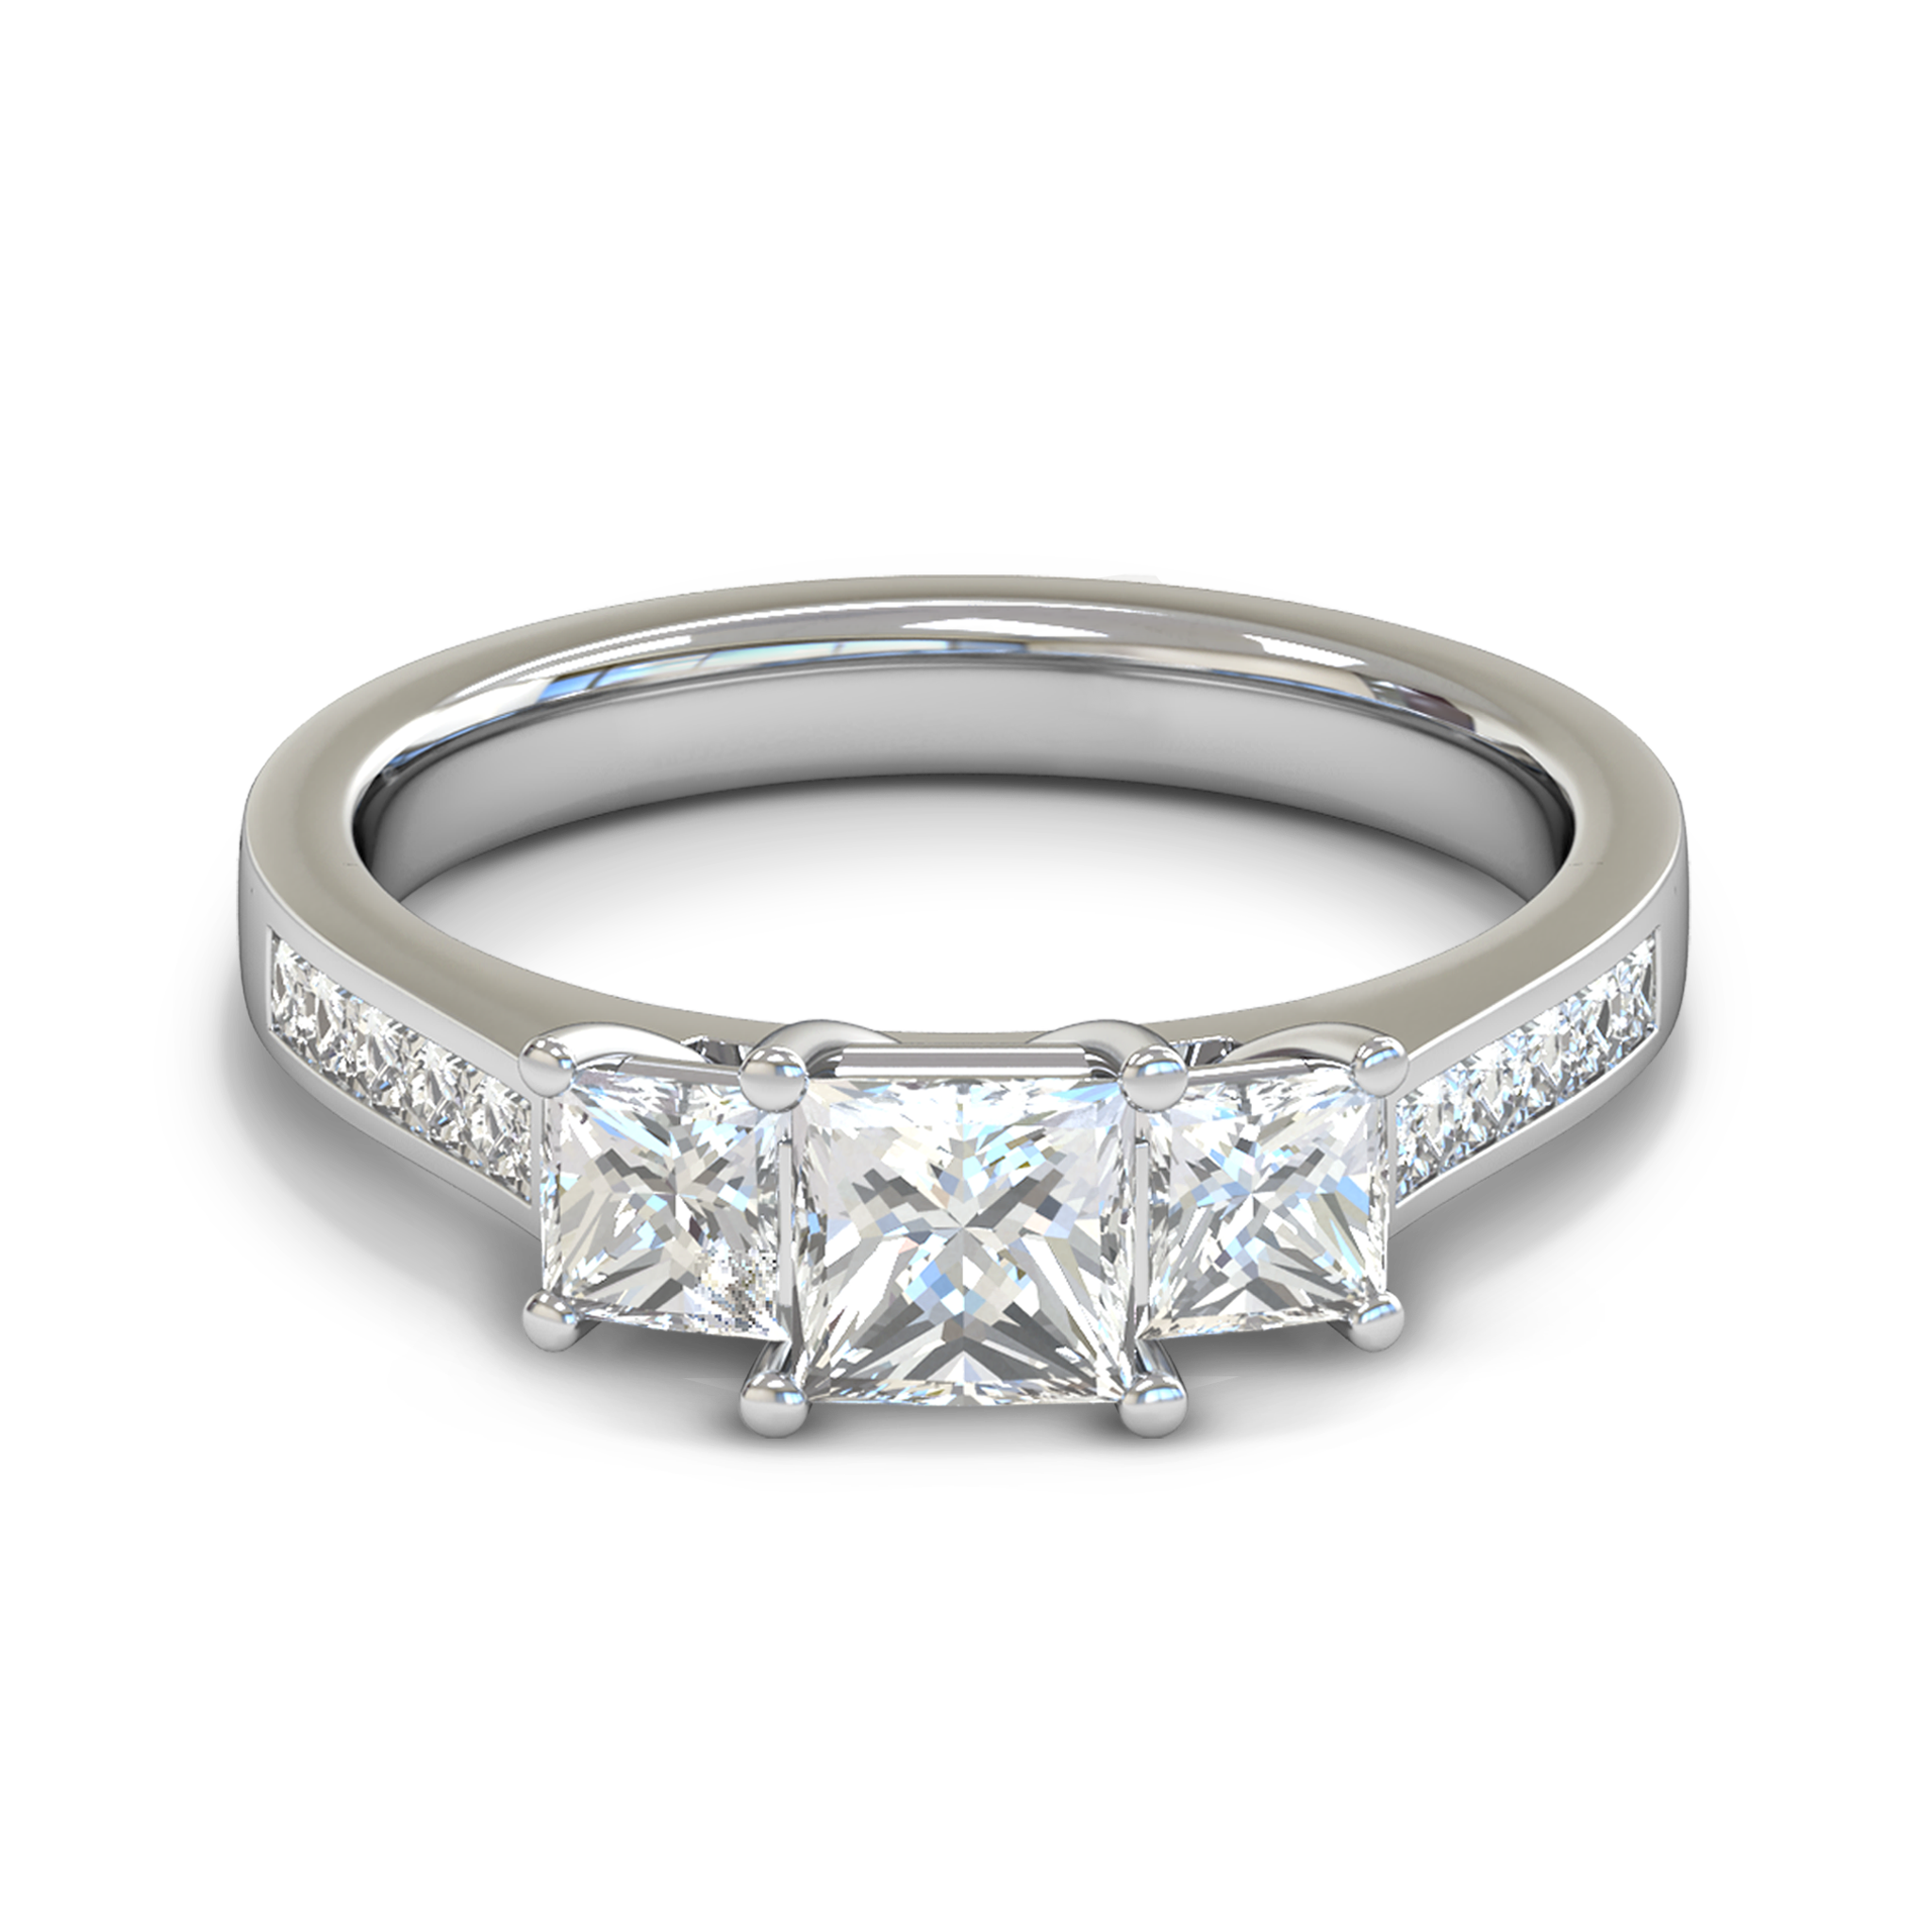 Trilogy Princess Cut Diamond Fairtrade Gold Engagement Ring in 18K White Fairtrade Gold